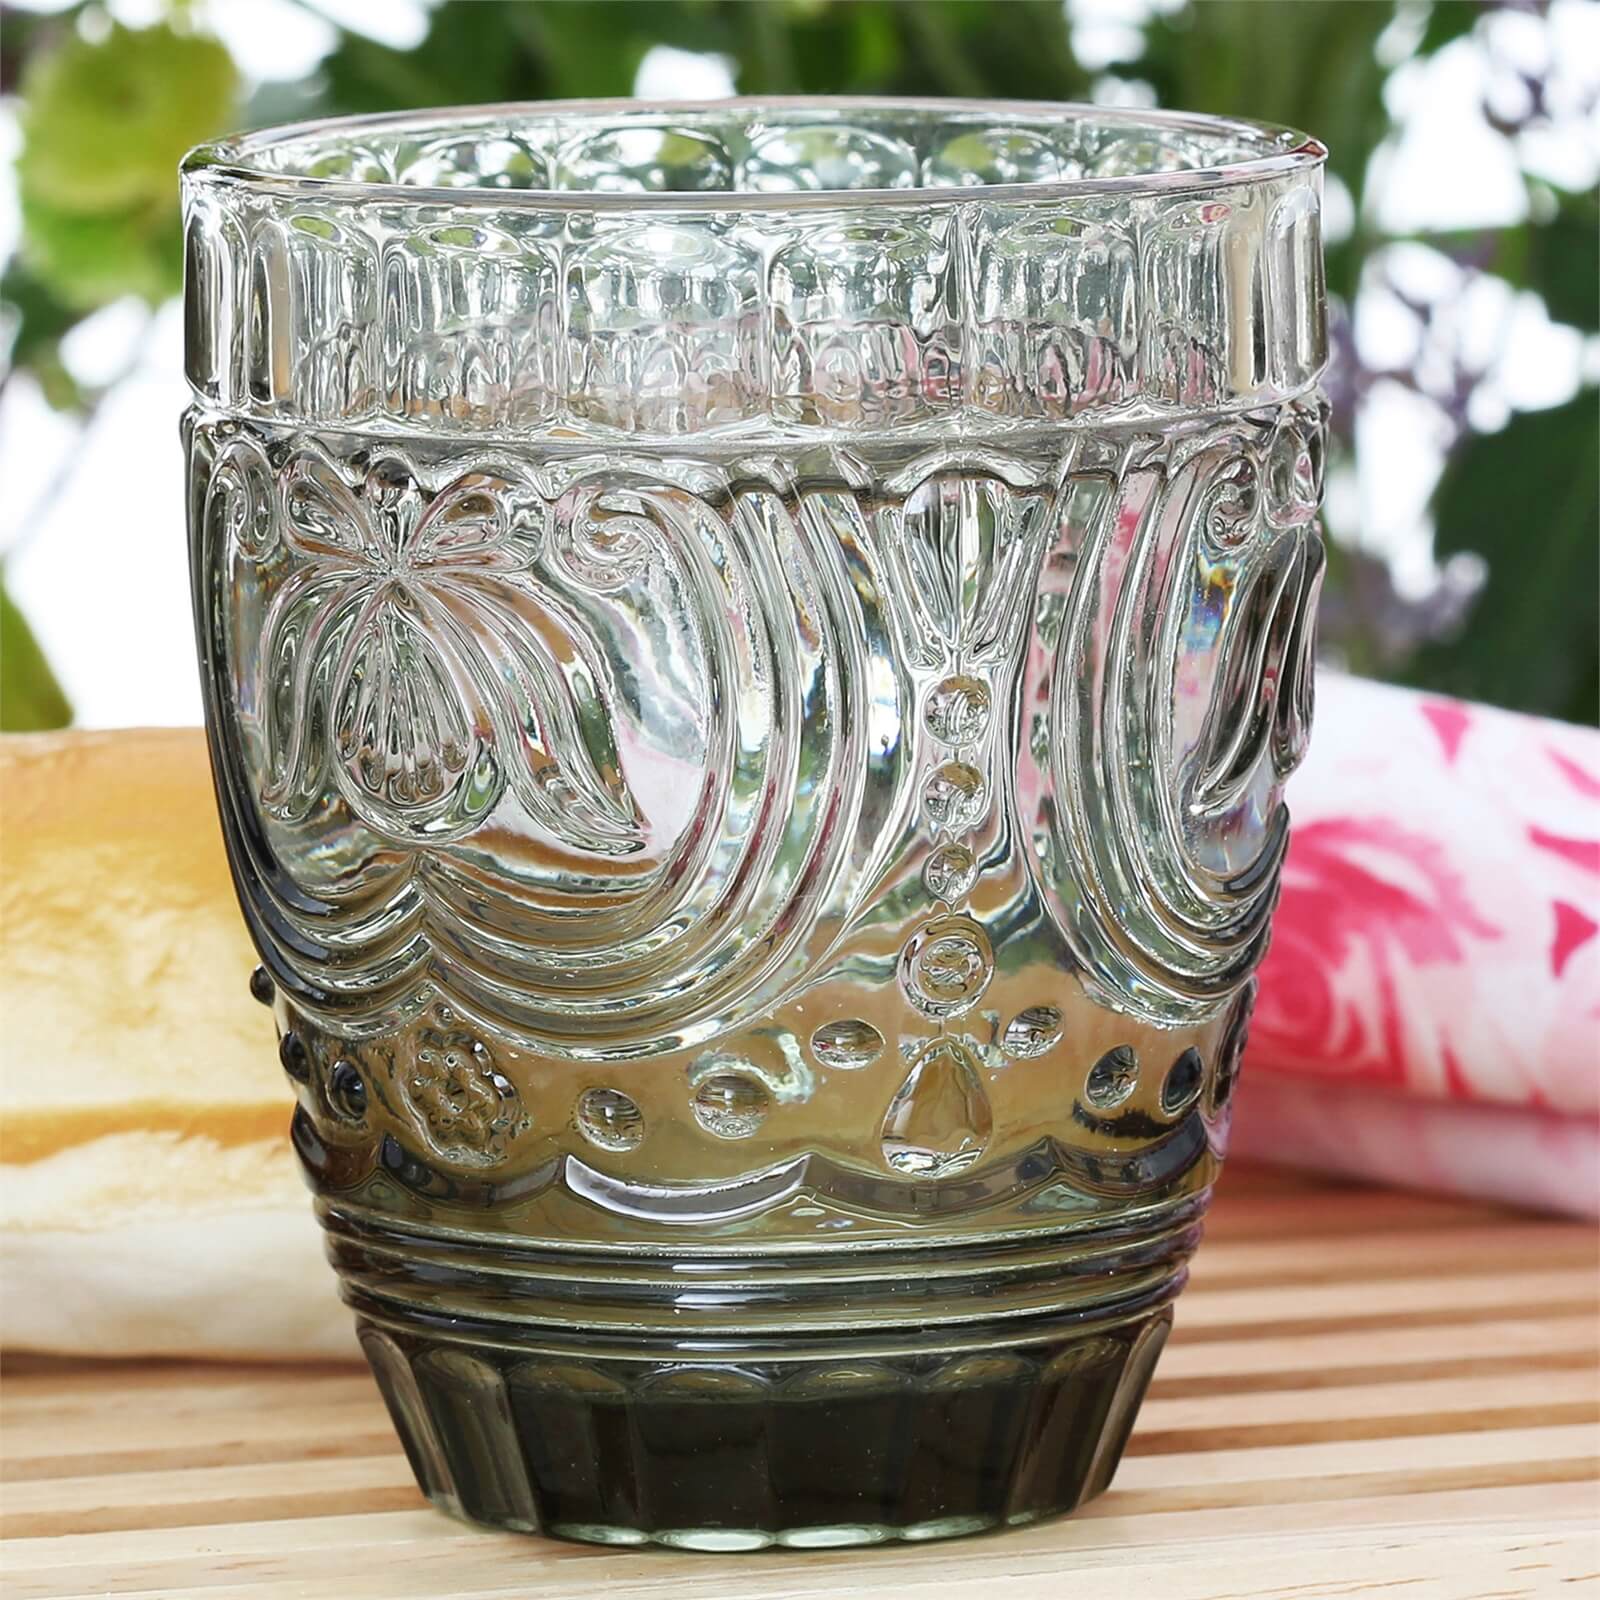 Imperial Smoked Glass Tumbler